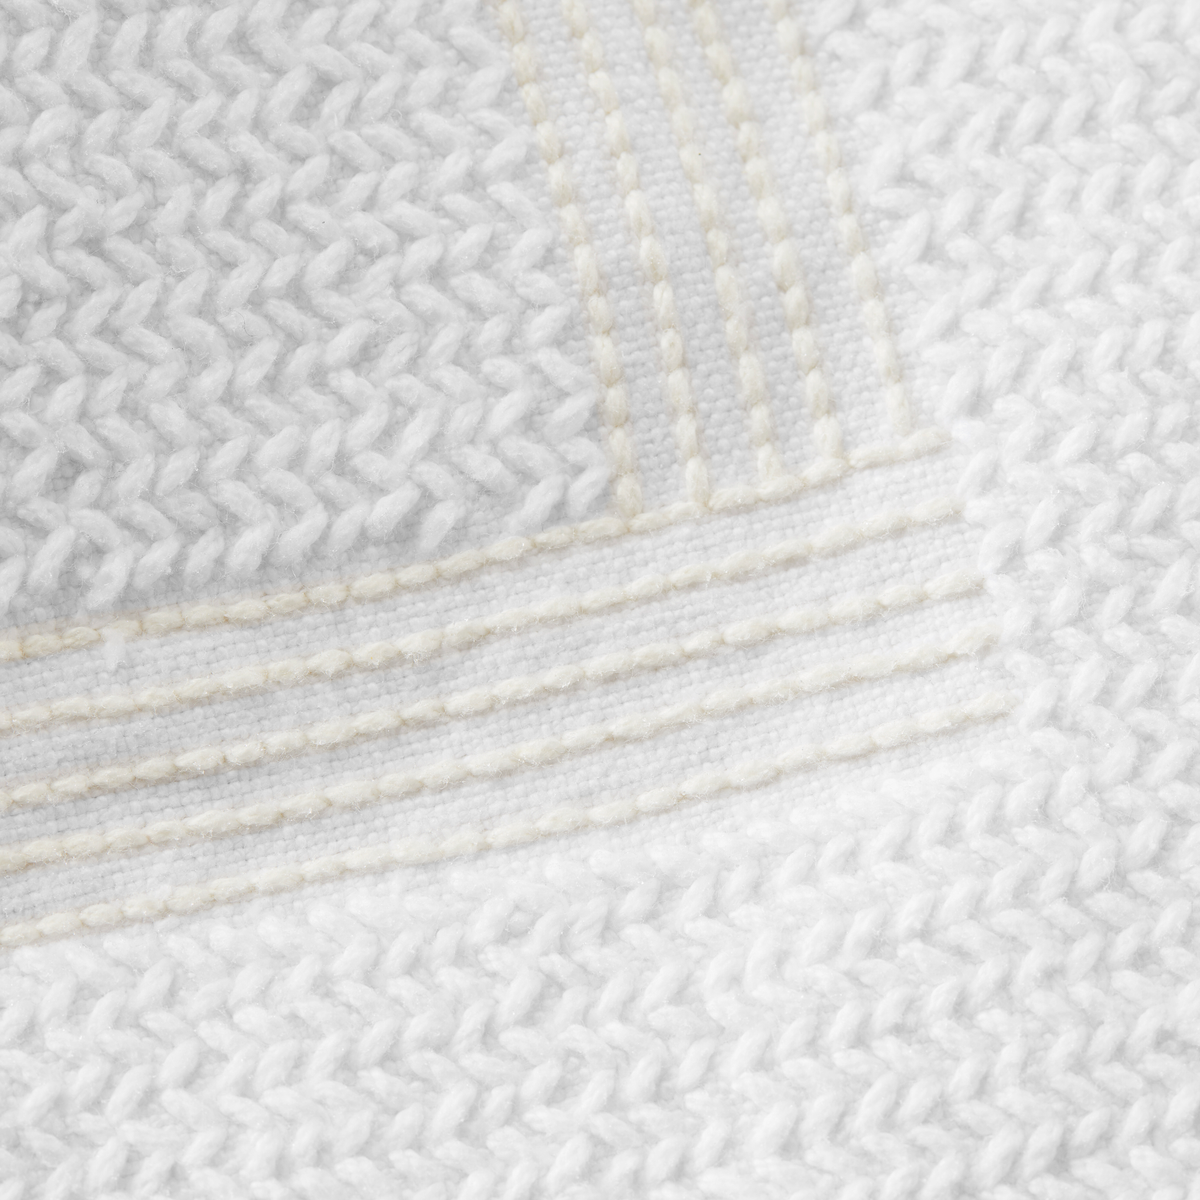 Detailed View of Sferra Lindo Bath Rugs in White Bisque Color